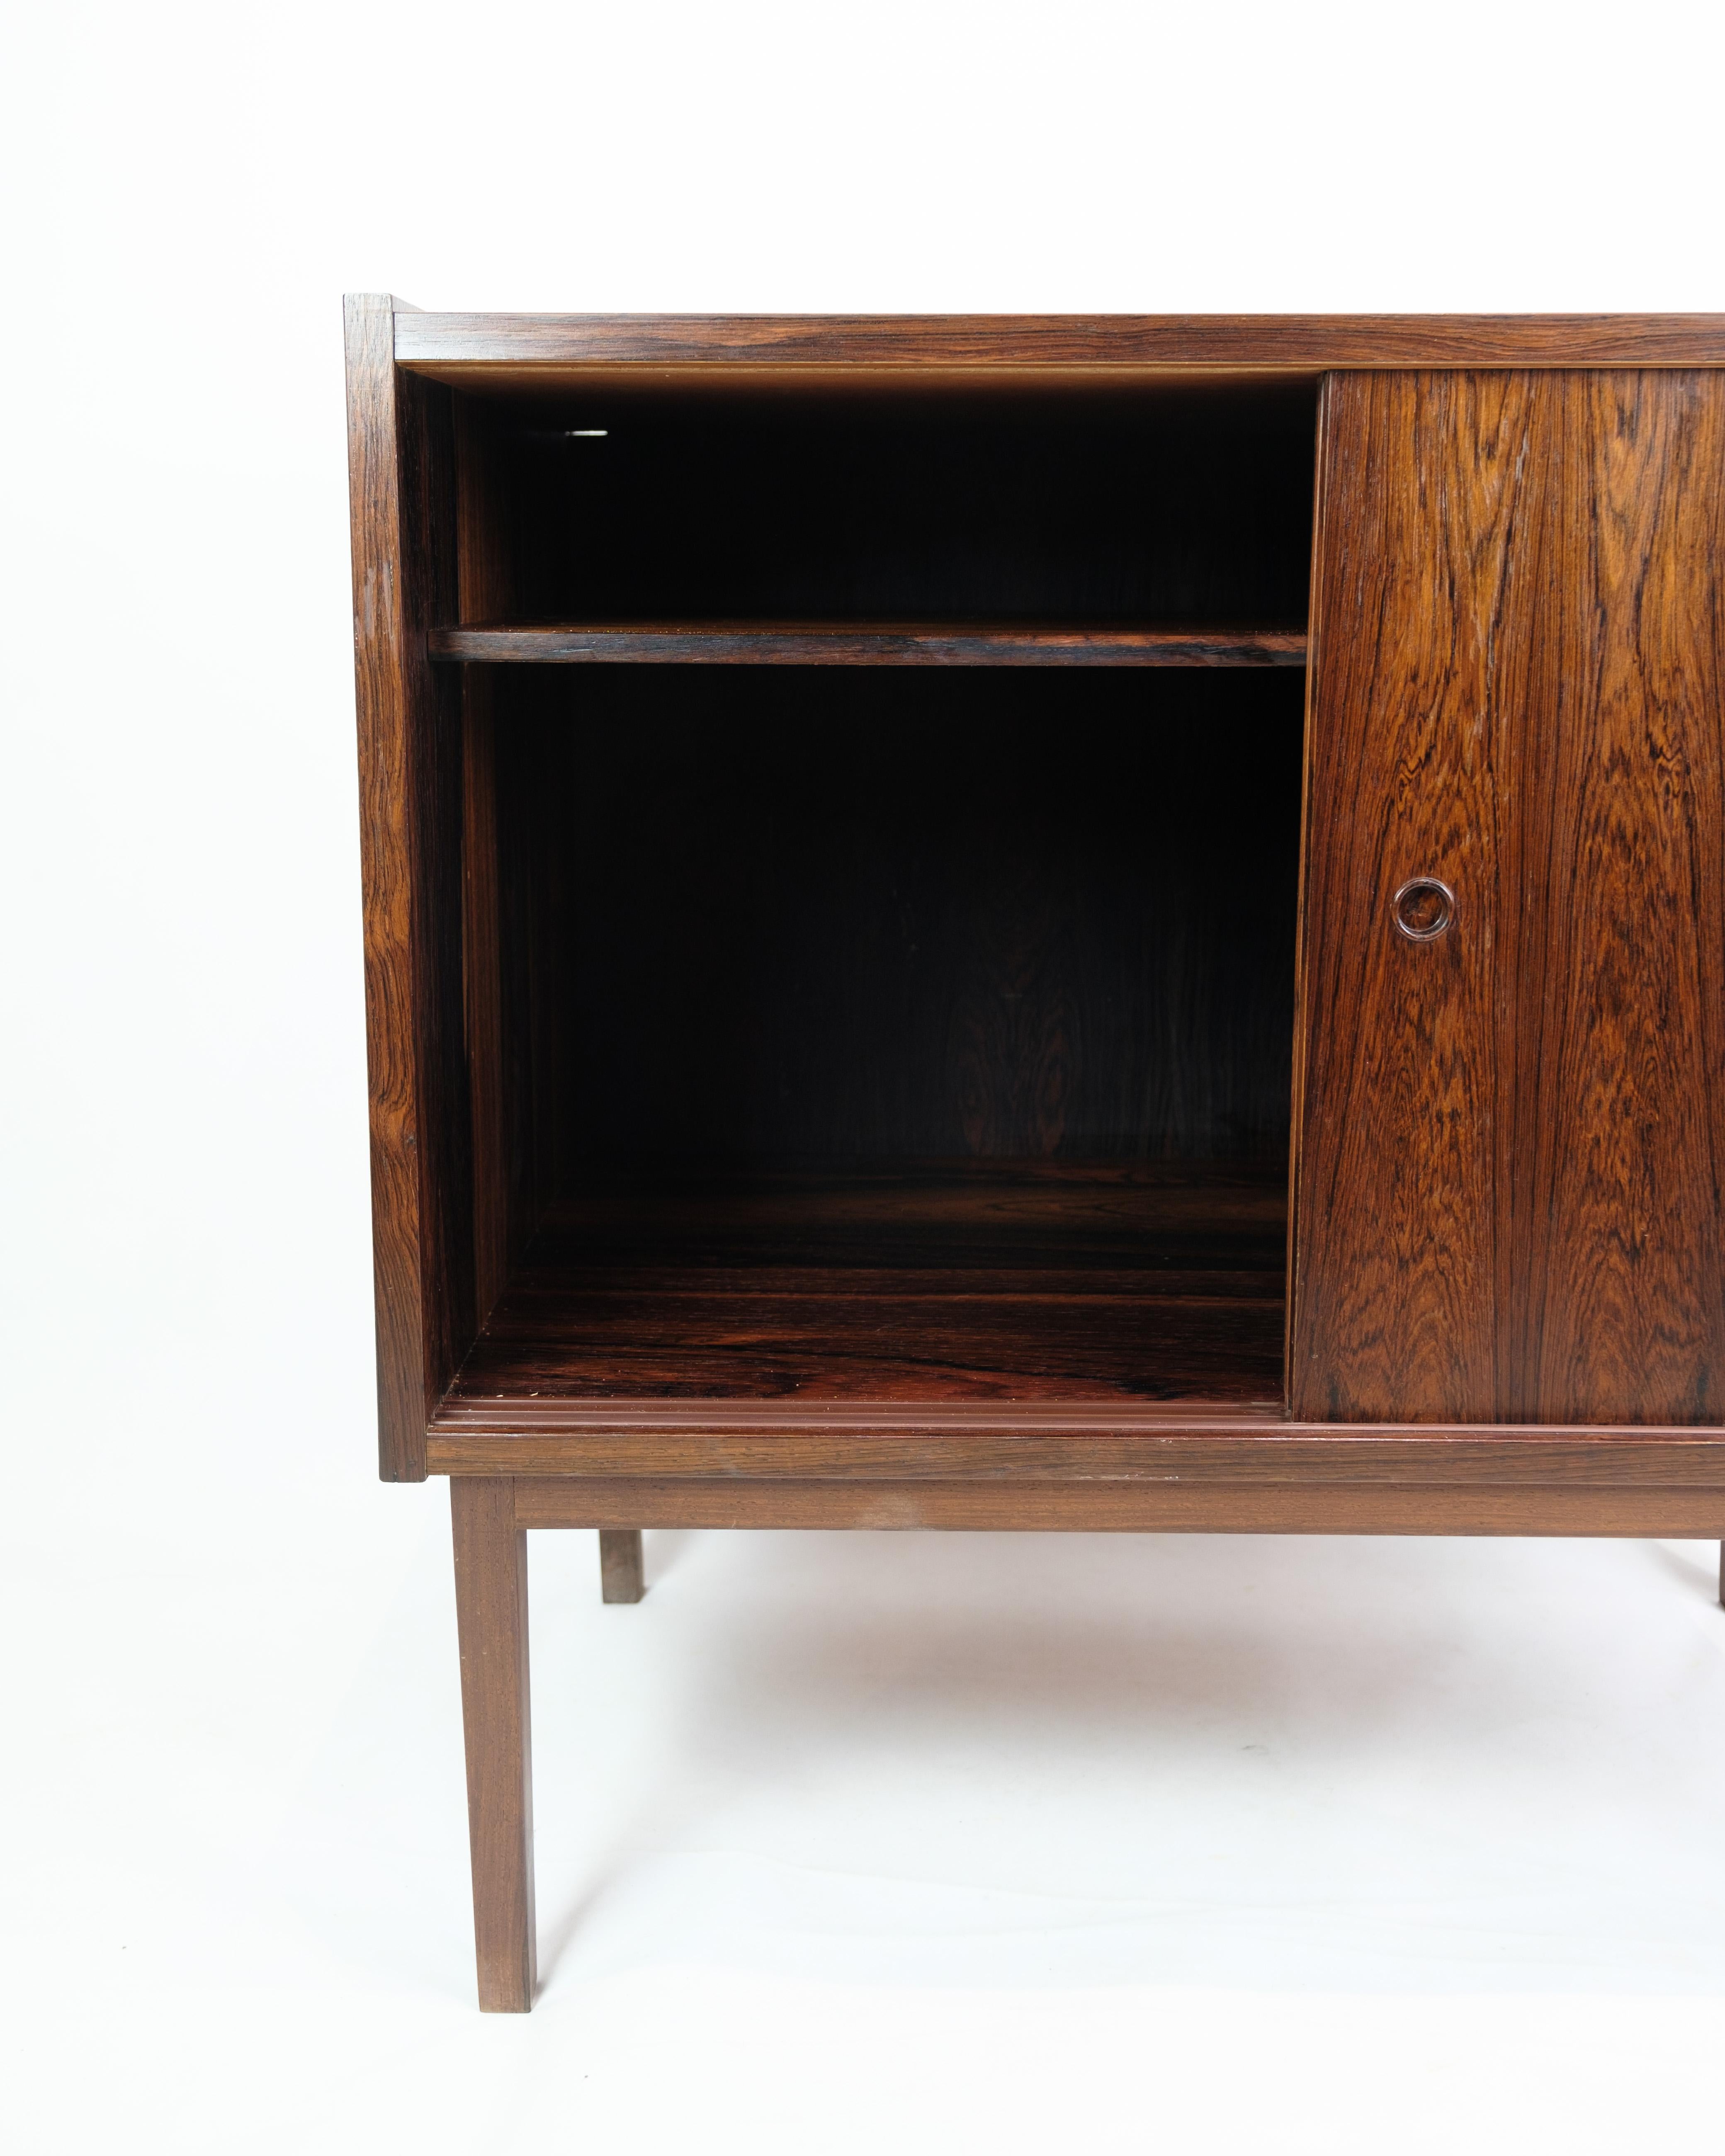 Teak Sideboard With Shelves Made In Rosewood, Danish Design From 1960s For Sale